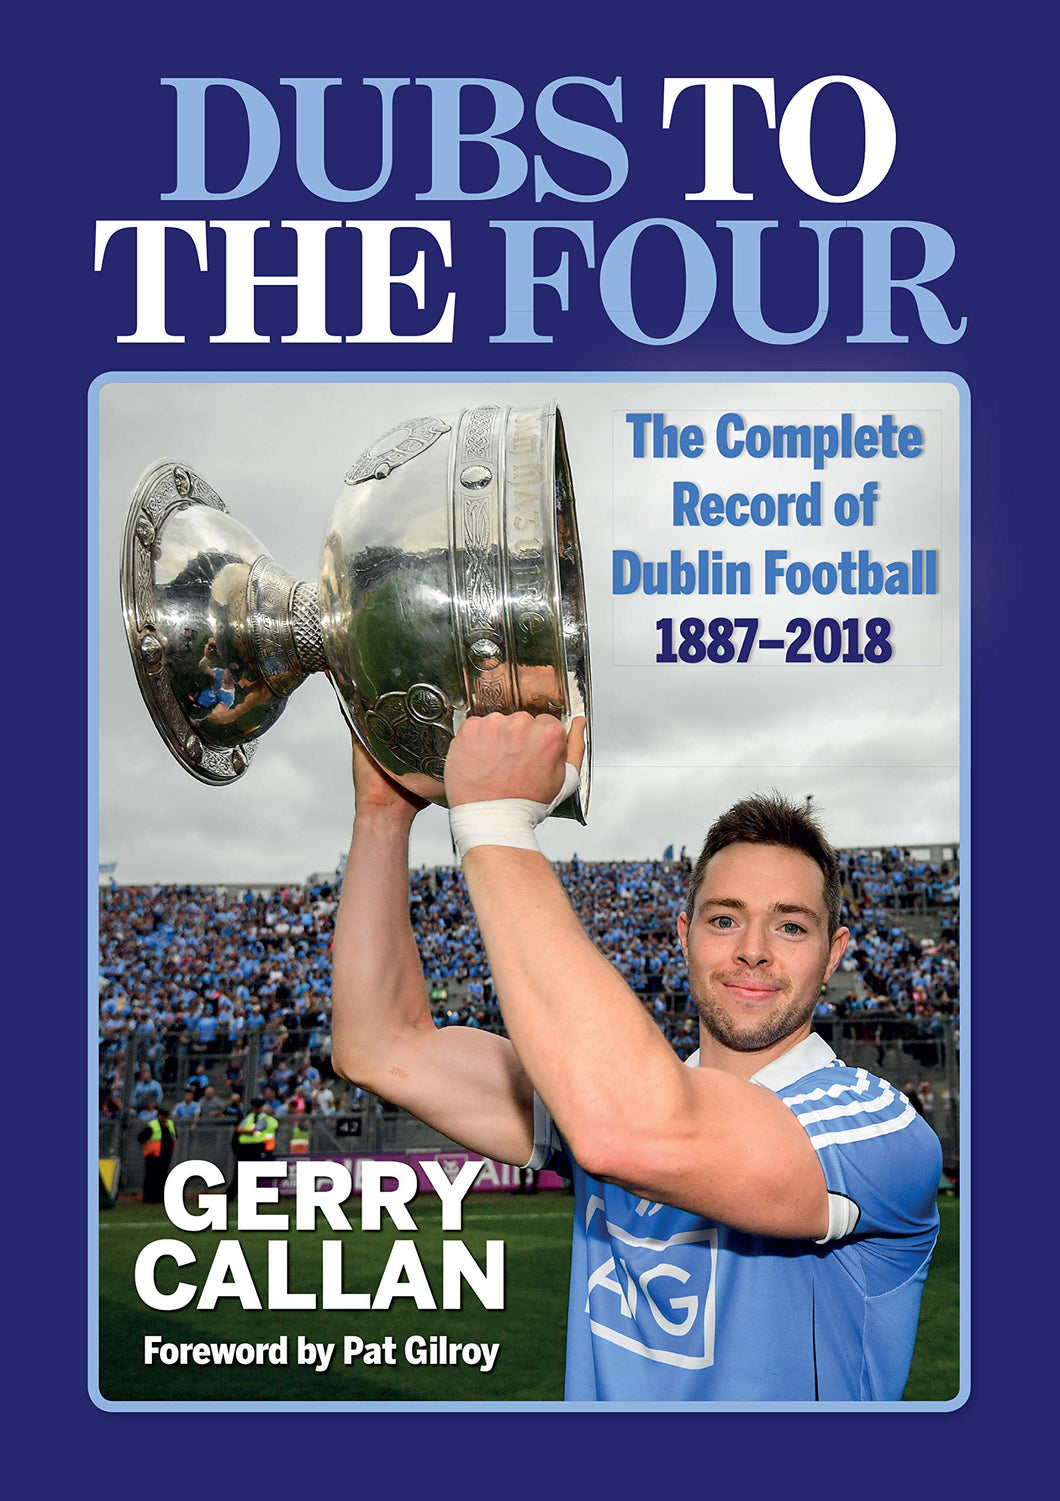 Dubs to the Four: The Complete Record of Dublin Football 1887-2018